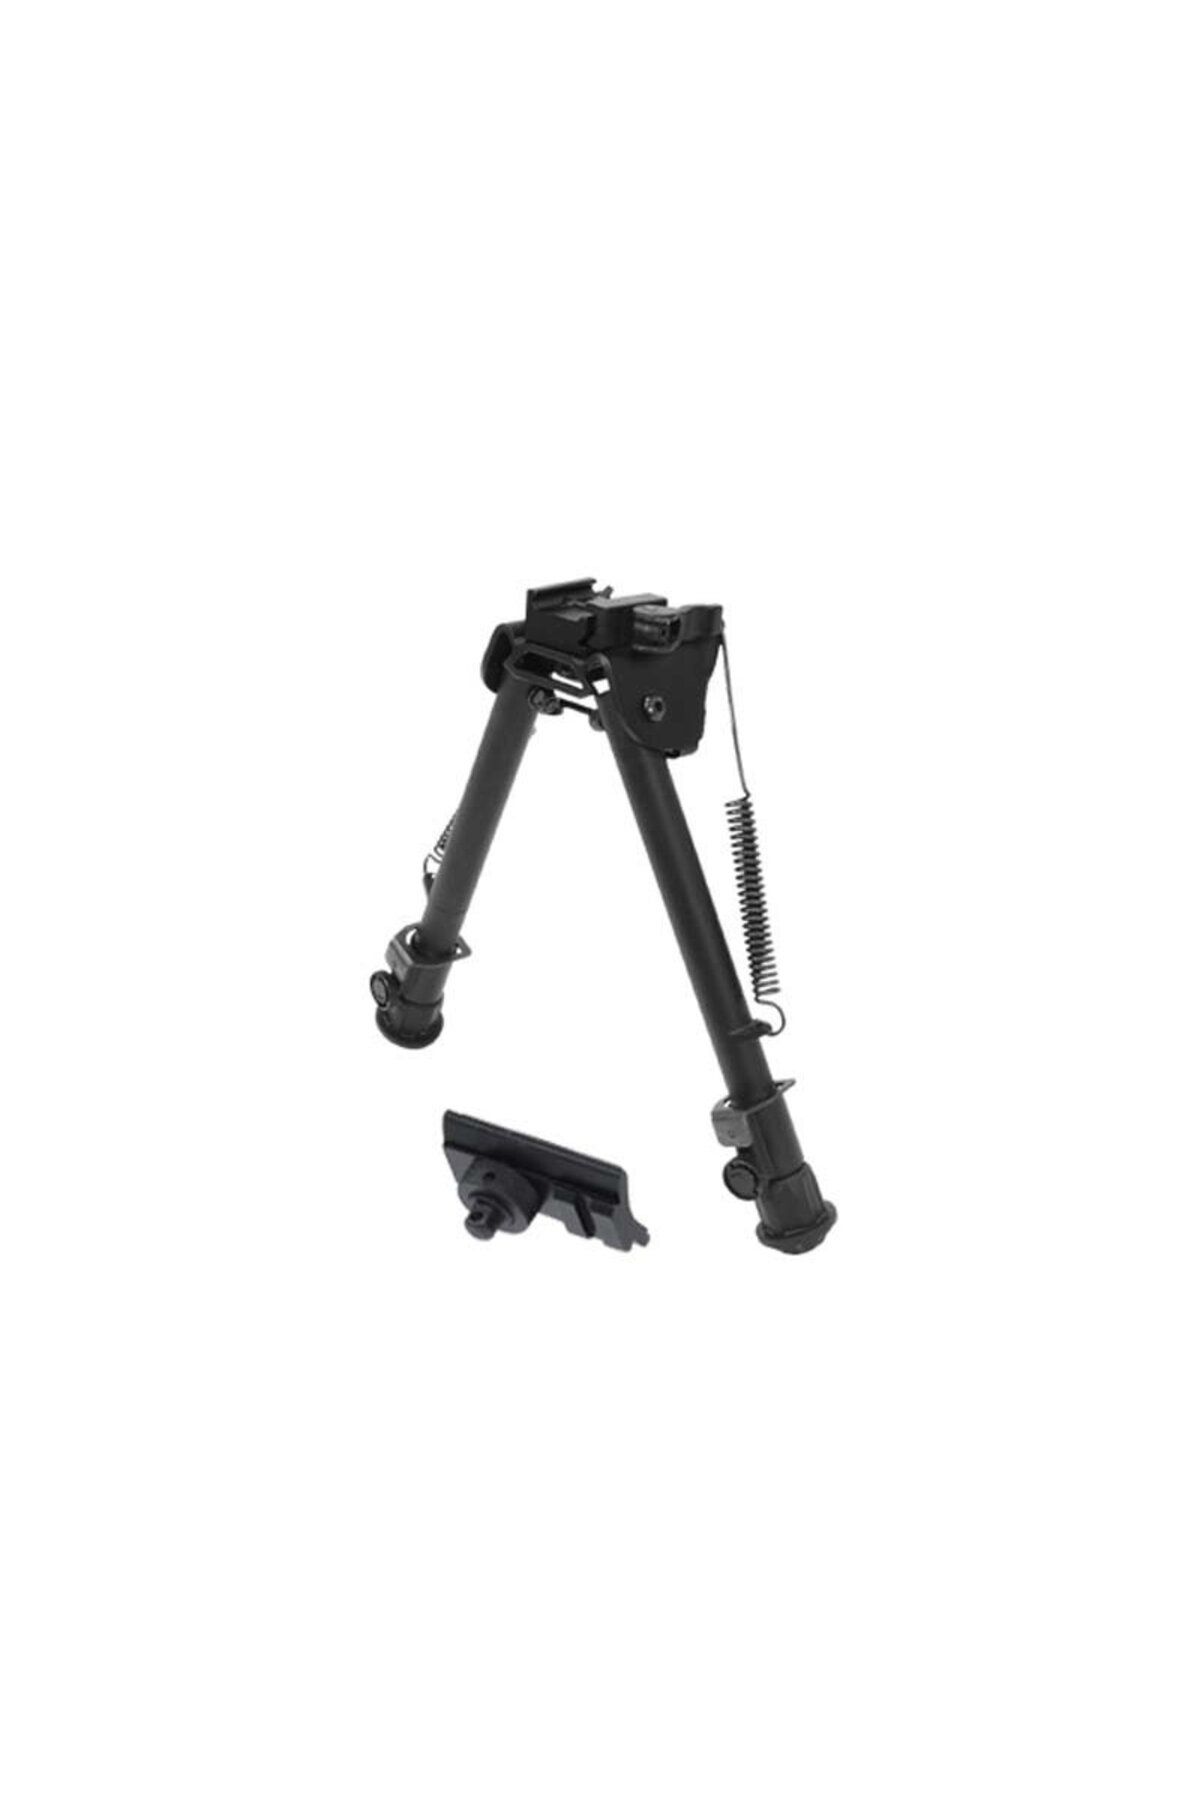 Leapers UNLEASH THE GLOW BIPOD CATAL AYAK